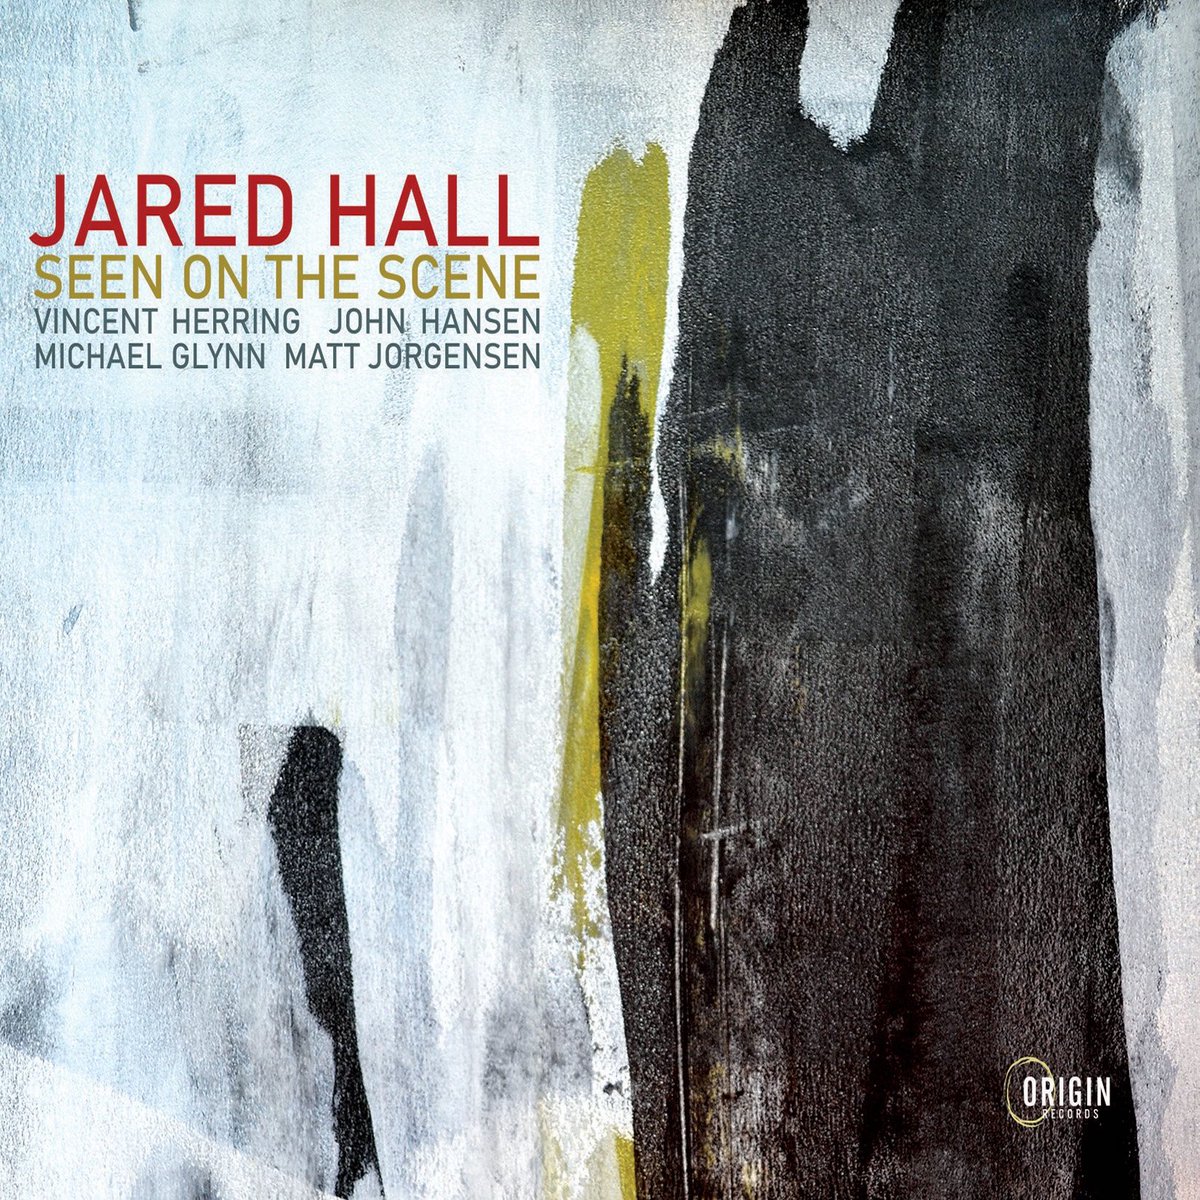 Full compositions, tight charts, great musicianship and always swinging! Jared Hall's Seen On the Scene on @OriginRecords is a can't miss listening experience and Currents' album of the week on 33third.org - bit.ly/currents-stream